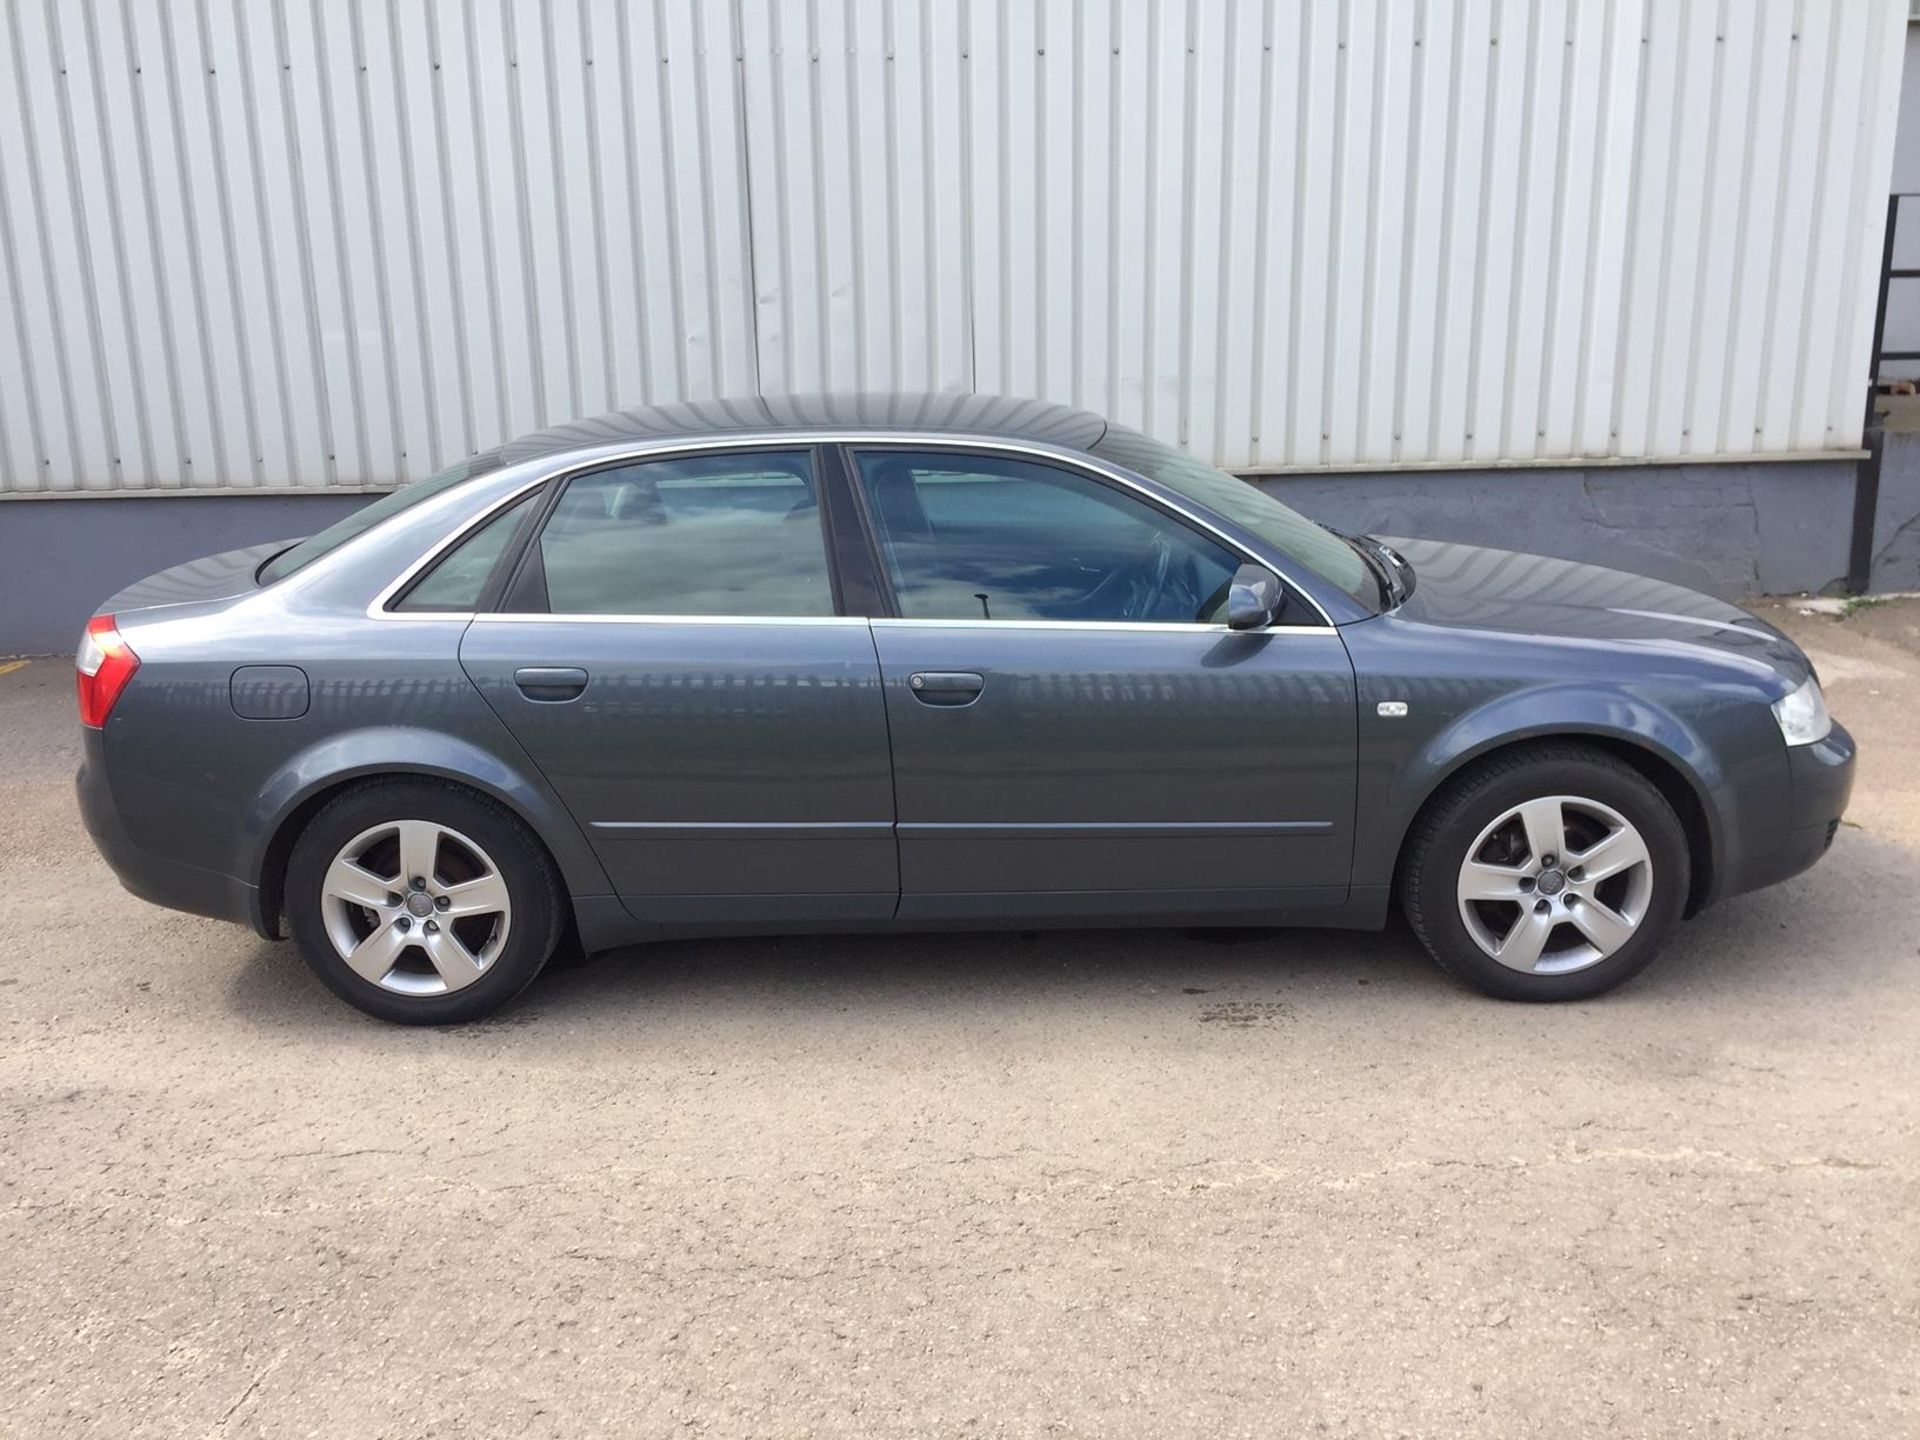 2003 Audi A4 Quattro 1.9 Tdi SE 4 Dr Saloon - CL505 - NO VAT ON THE HAMMER - Location: Corby, Northa - Image 13 of 15